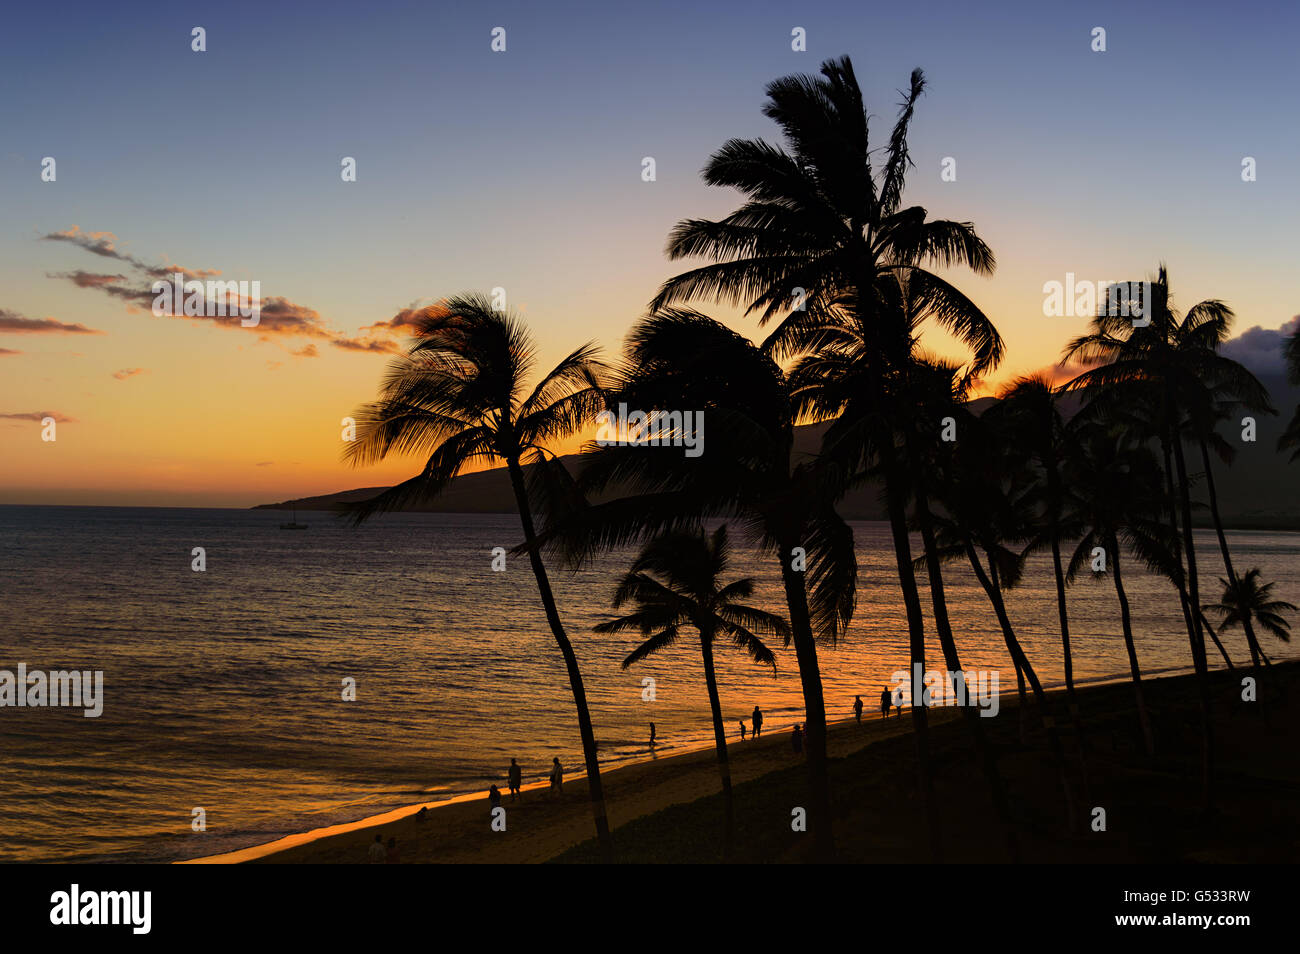 Palm trees and the ocean against a beautiful Maui sunset with people walking on the beach Stock Photo